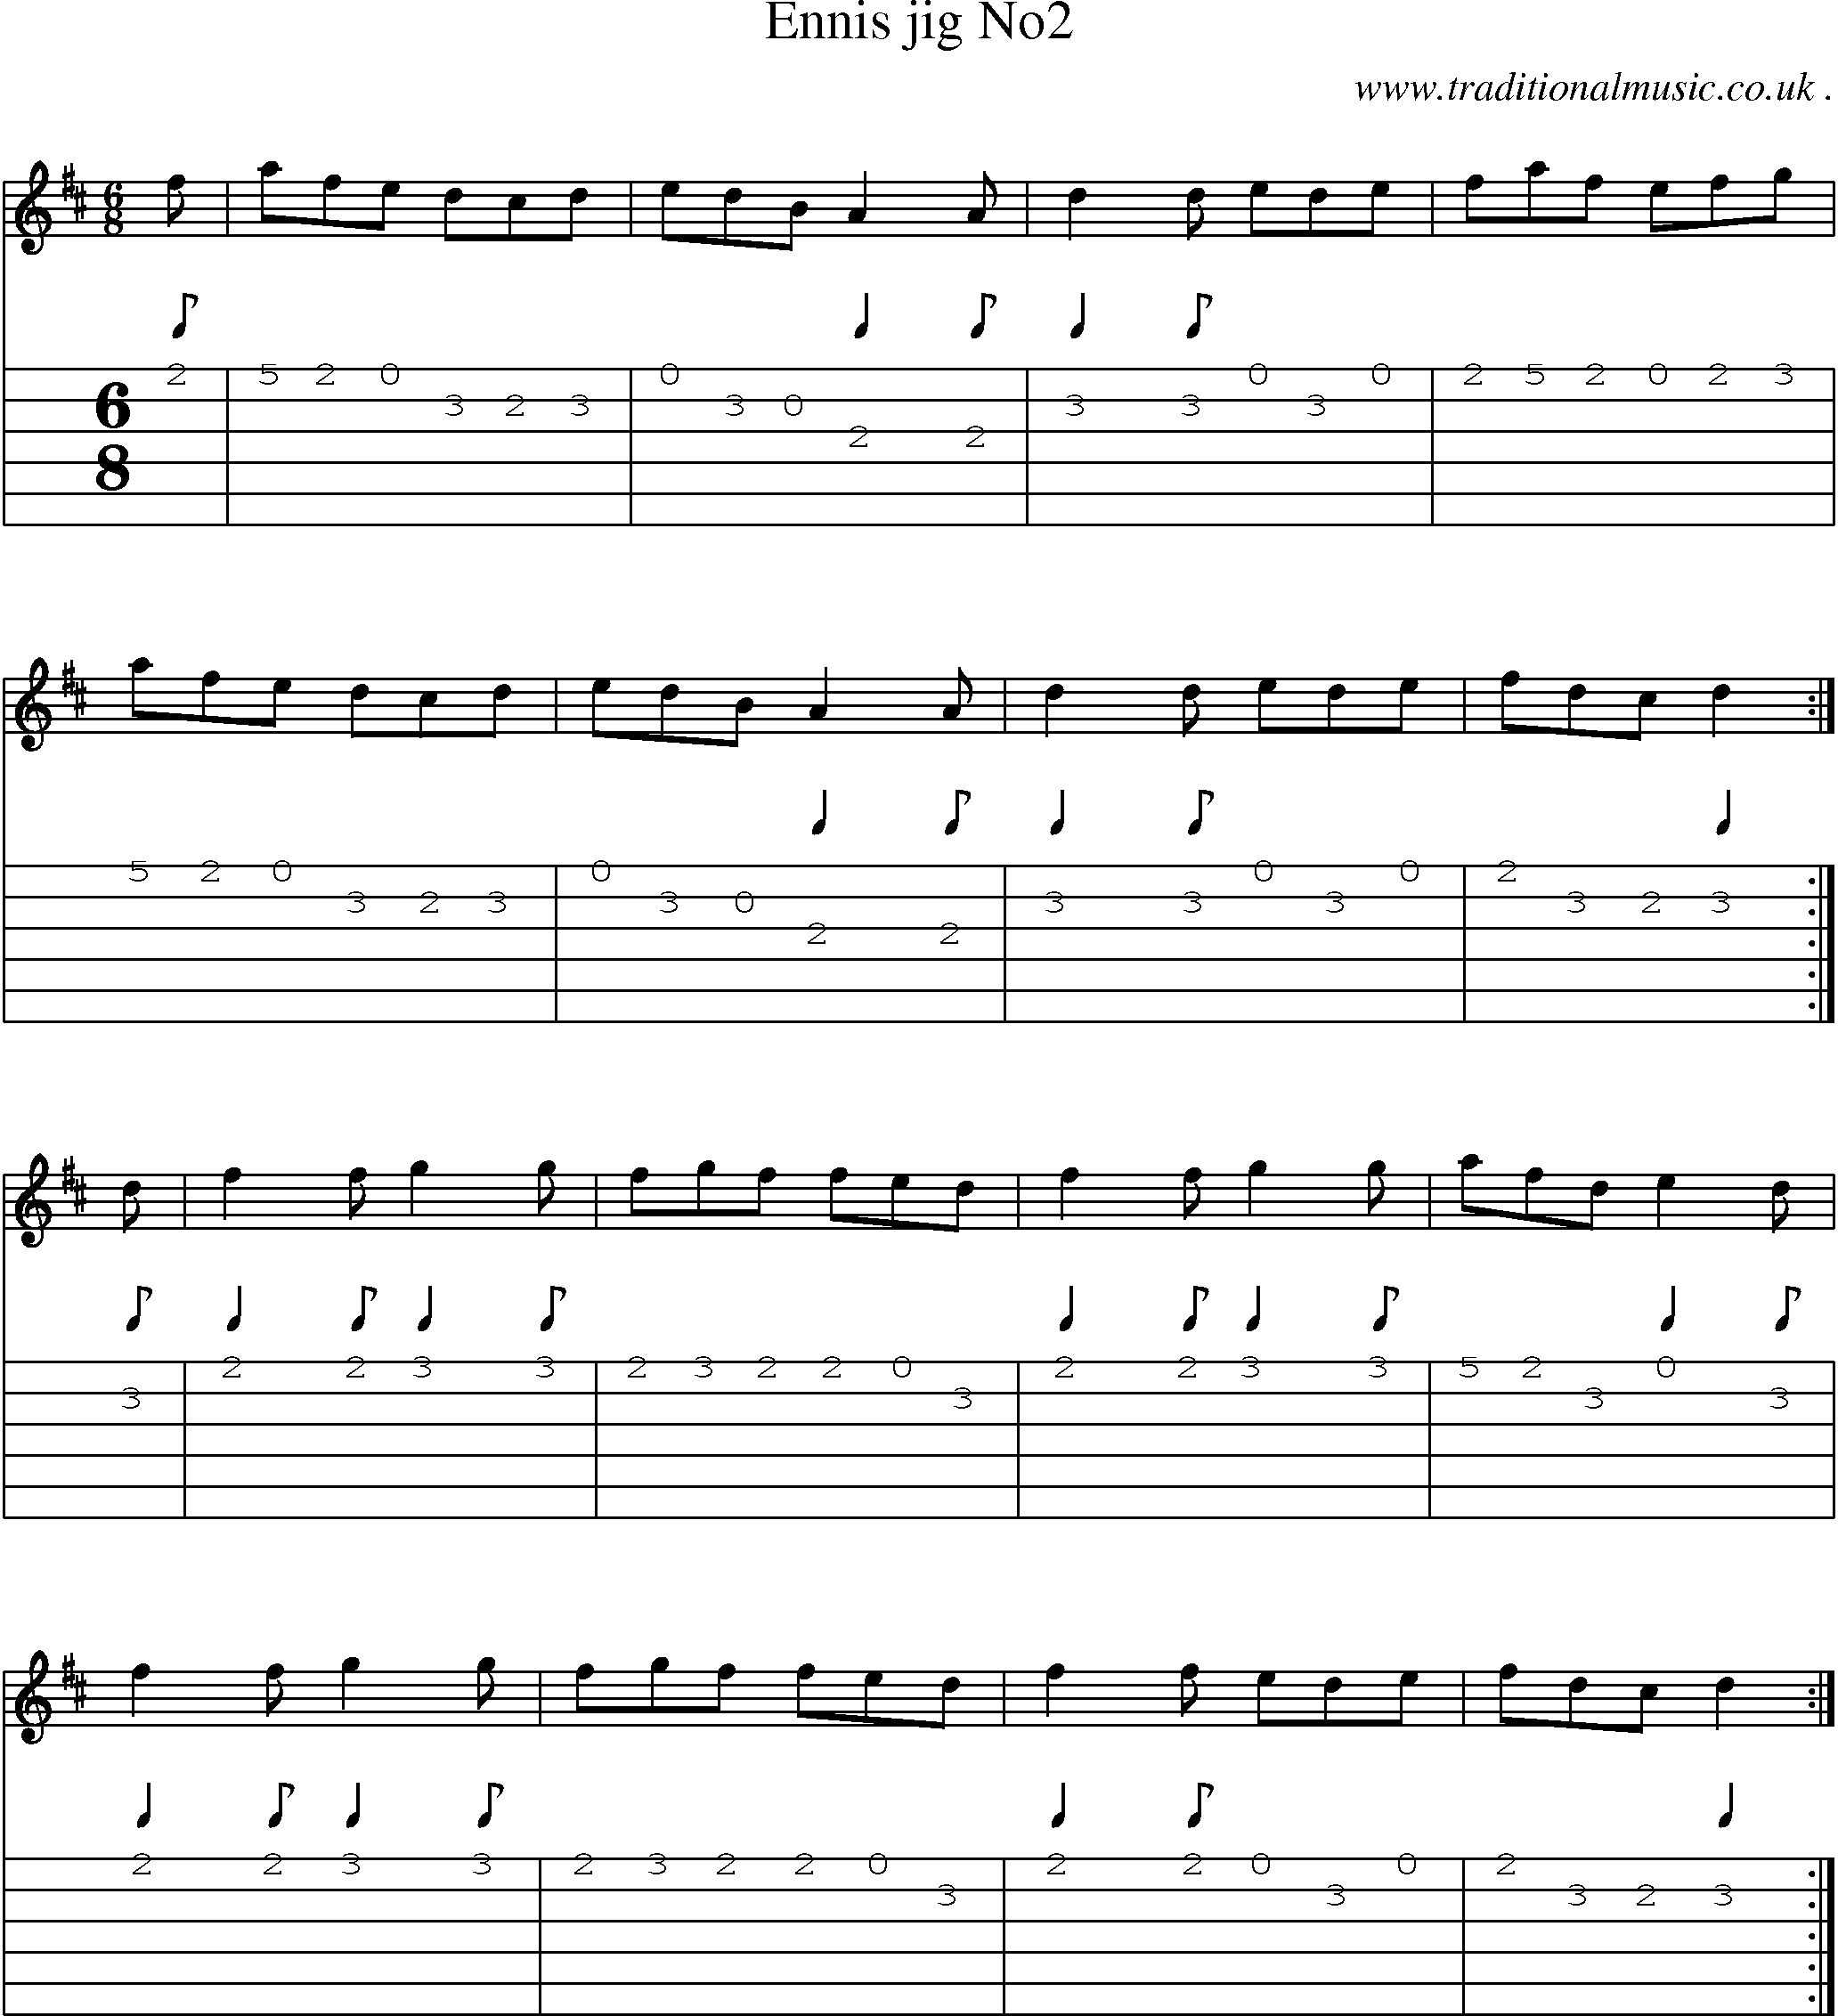 Sheet-Music and Guitar Tabs for Ennis Jig No2